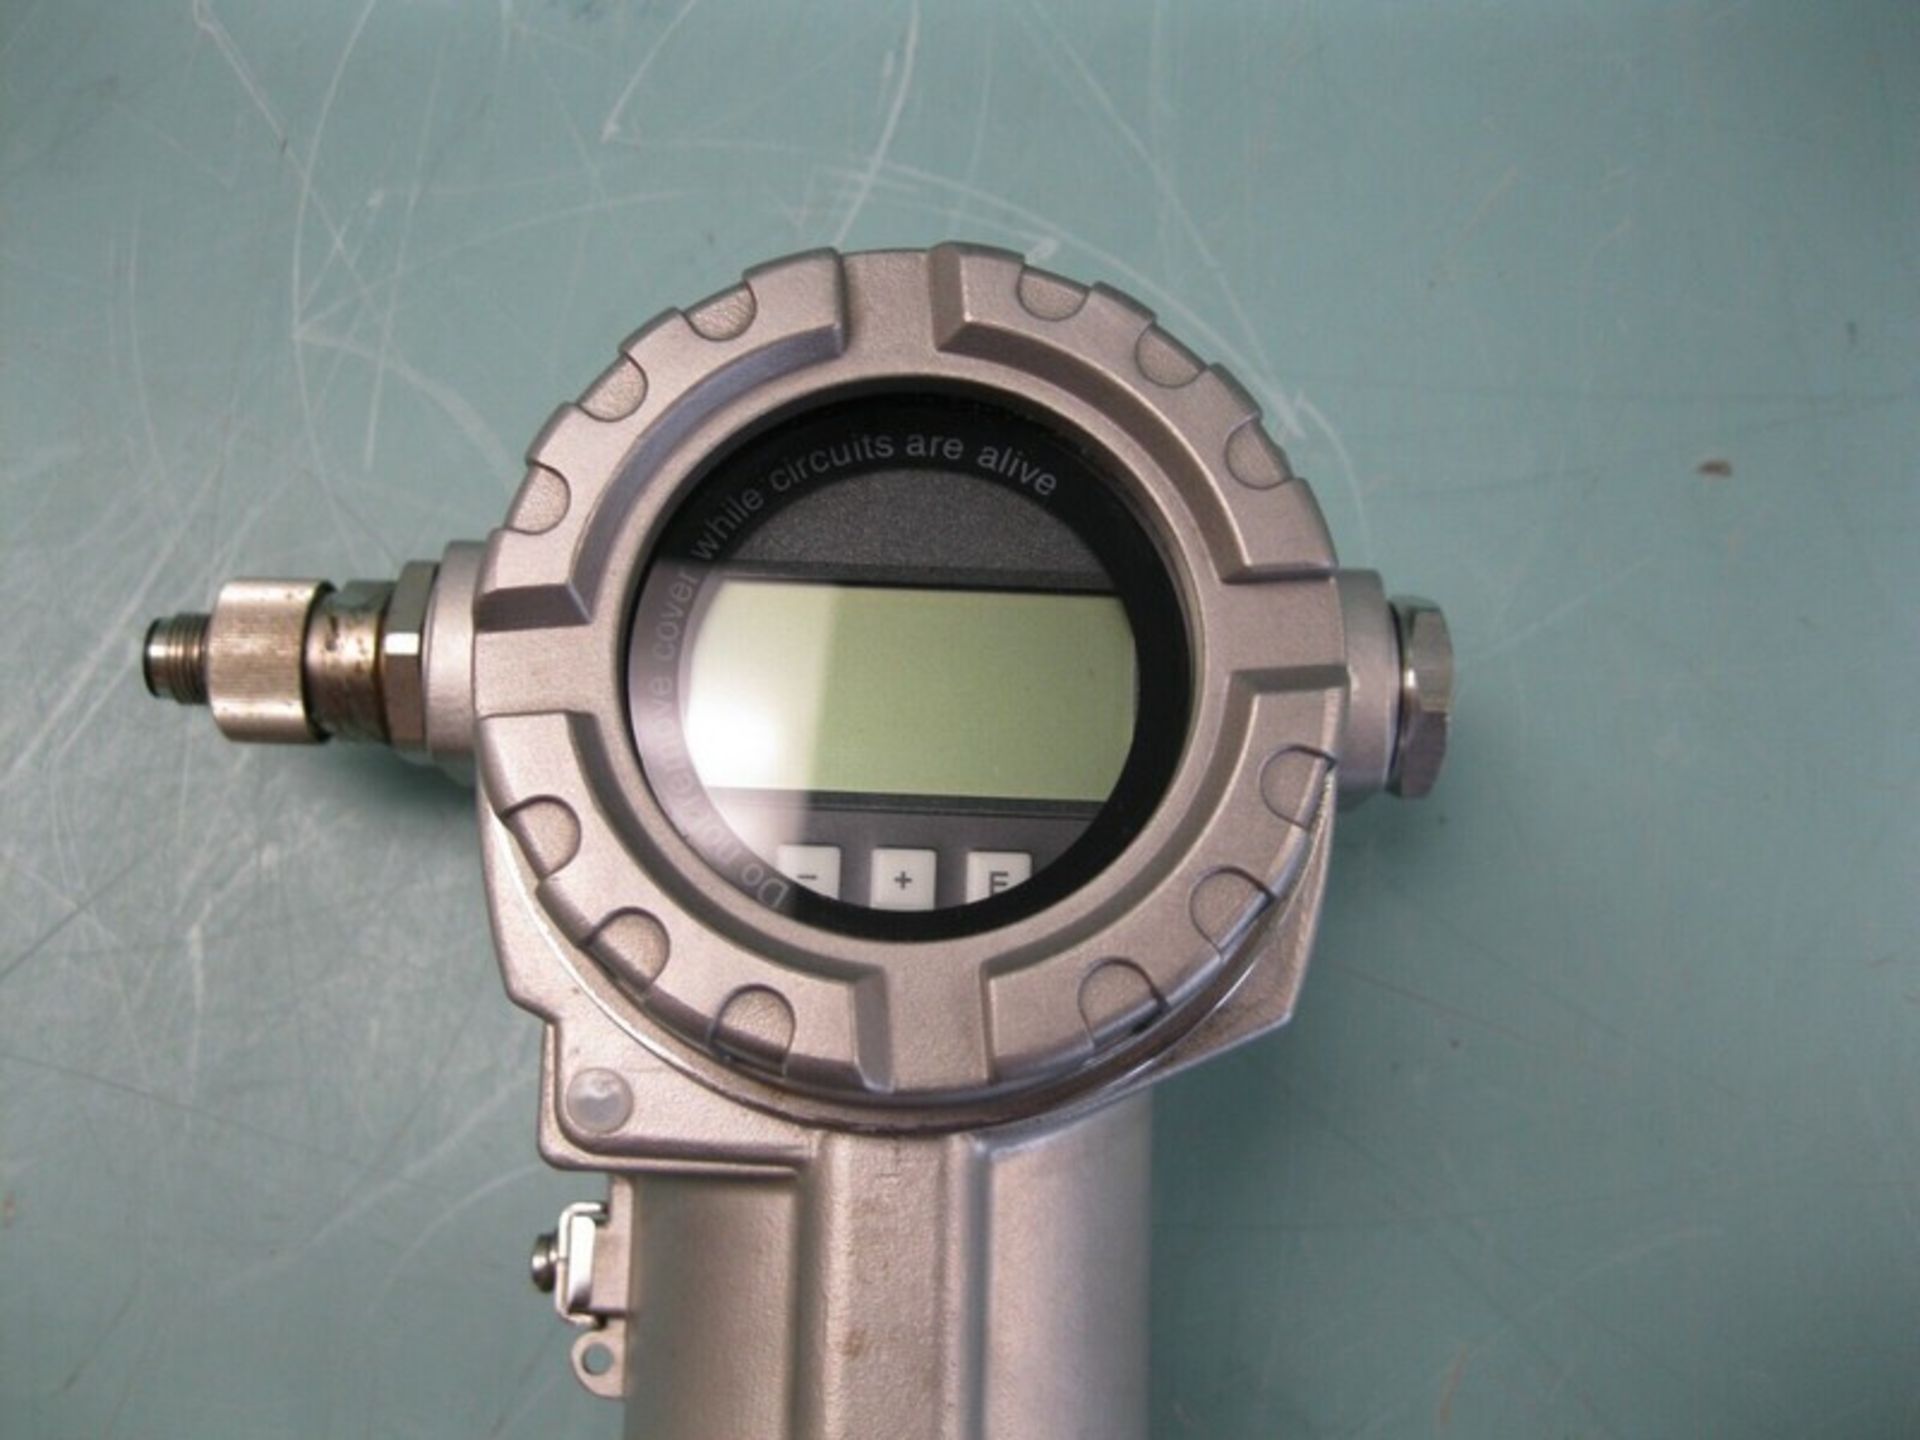 Endress Hauser PMC71-1T9E4/0 Cerabar S Pressure Transmitter (Located Springfield, NH)(Handling - Image 2 of 5